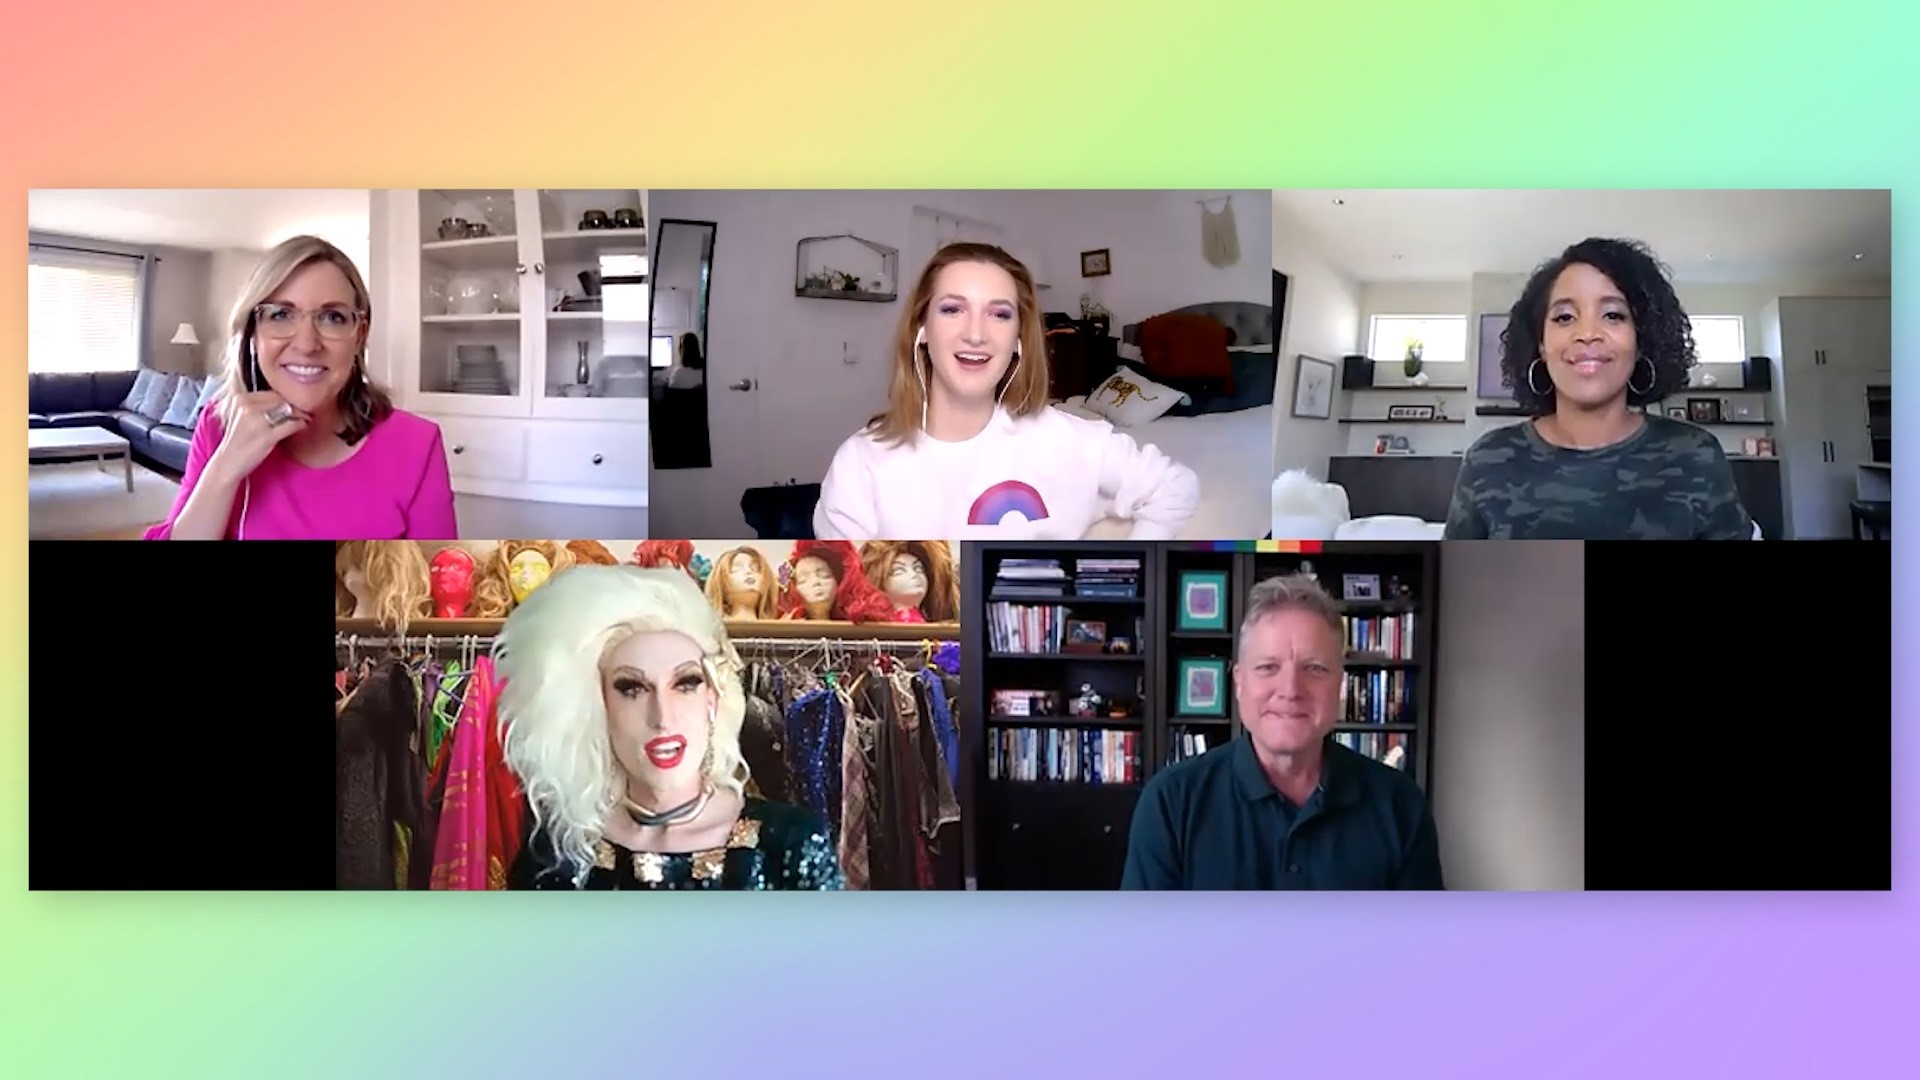 This year's Pride is virtual this year, with lots of fun, informative and meaningful events to choose from on June 26th and 27th. #k5evening